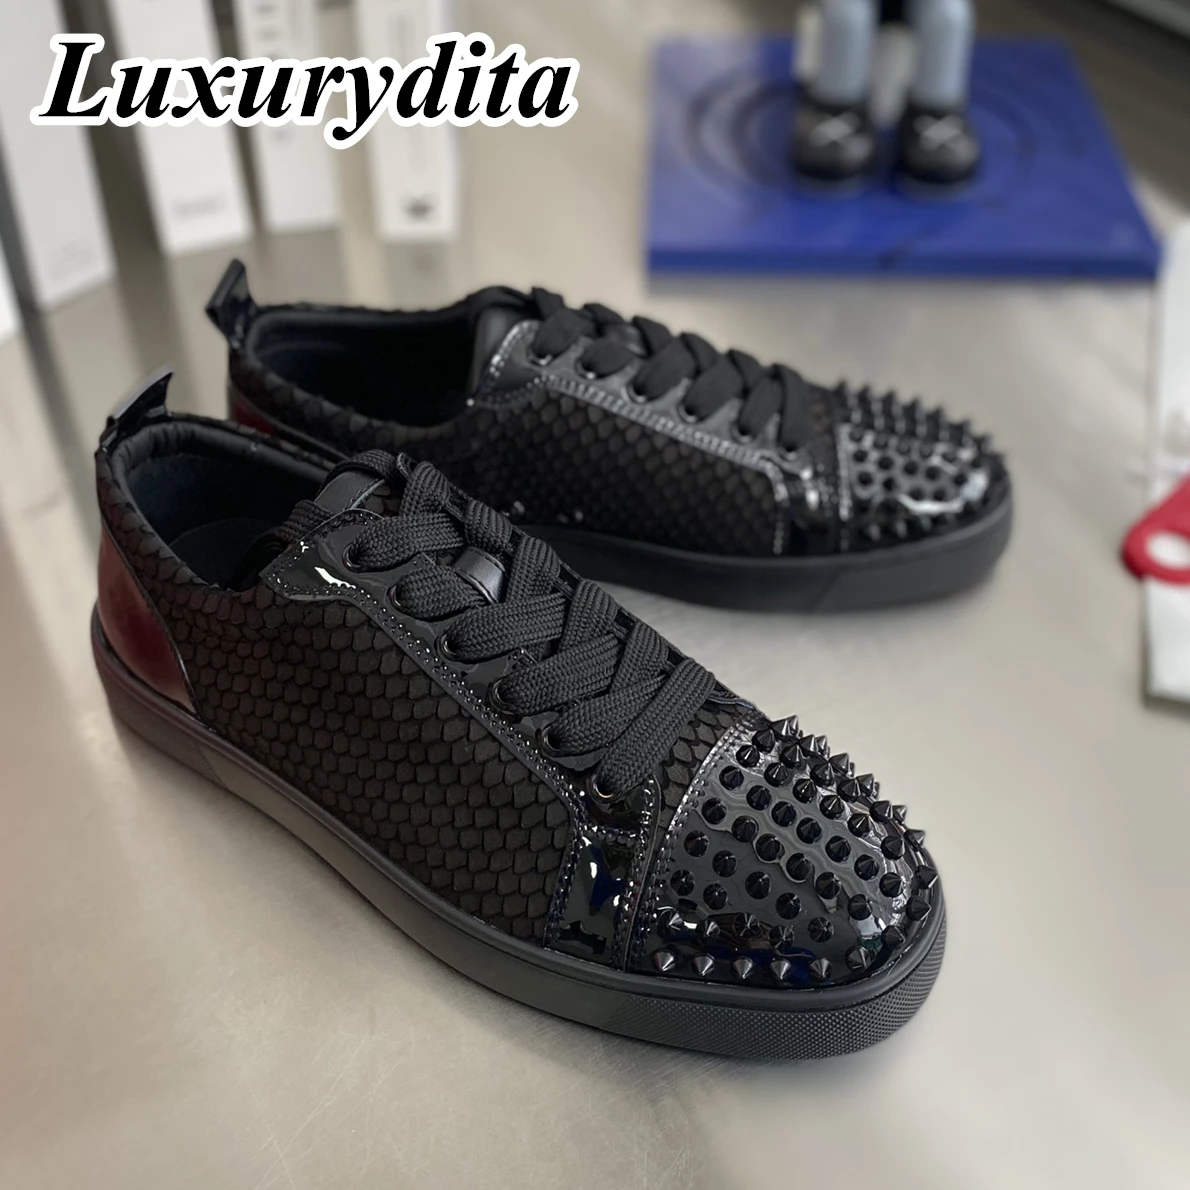 

LUXURYDITA Designer Men Casual Sneakers Real Leather Red sole Luxury Womens Tennis Shoes 35-47 Fashion Unisex loafers HJ1359